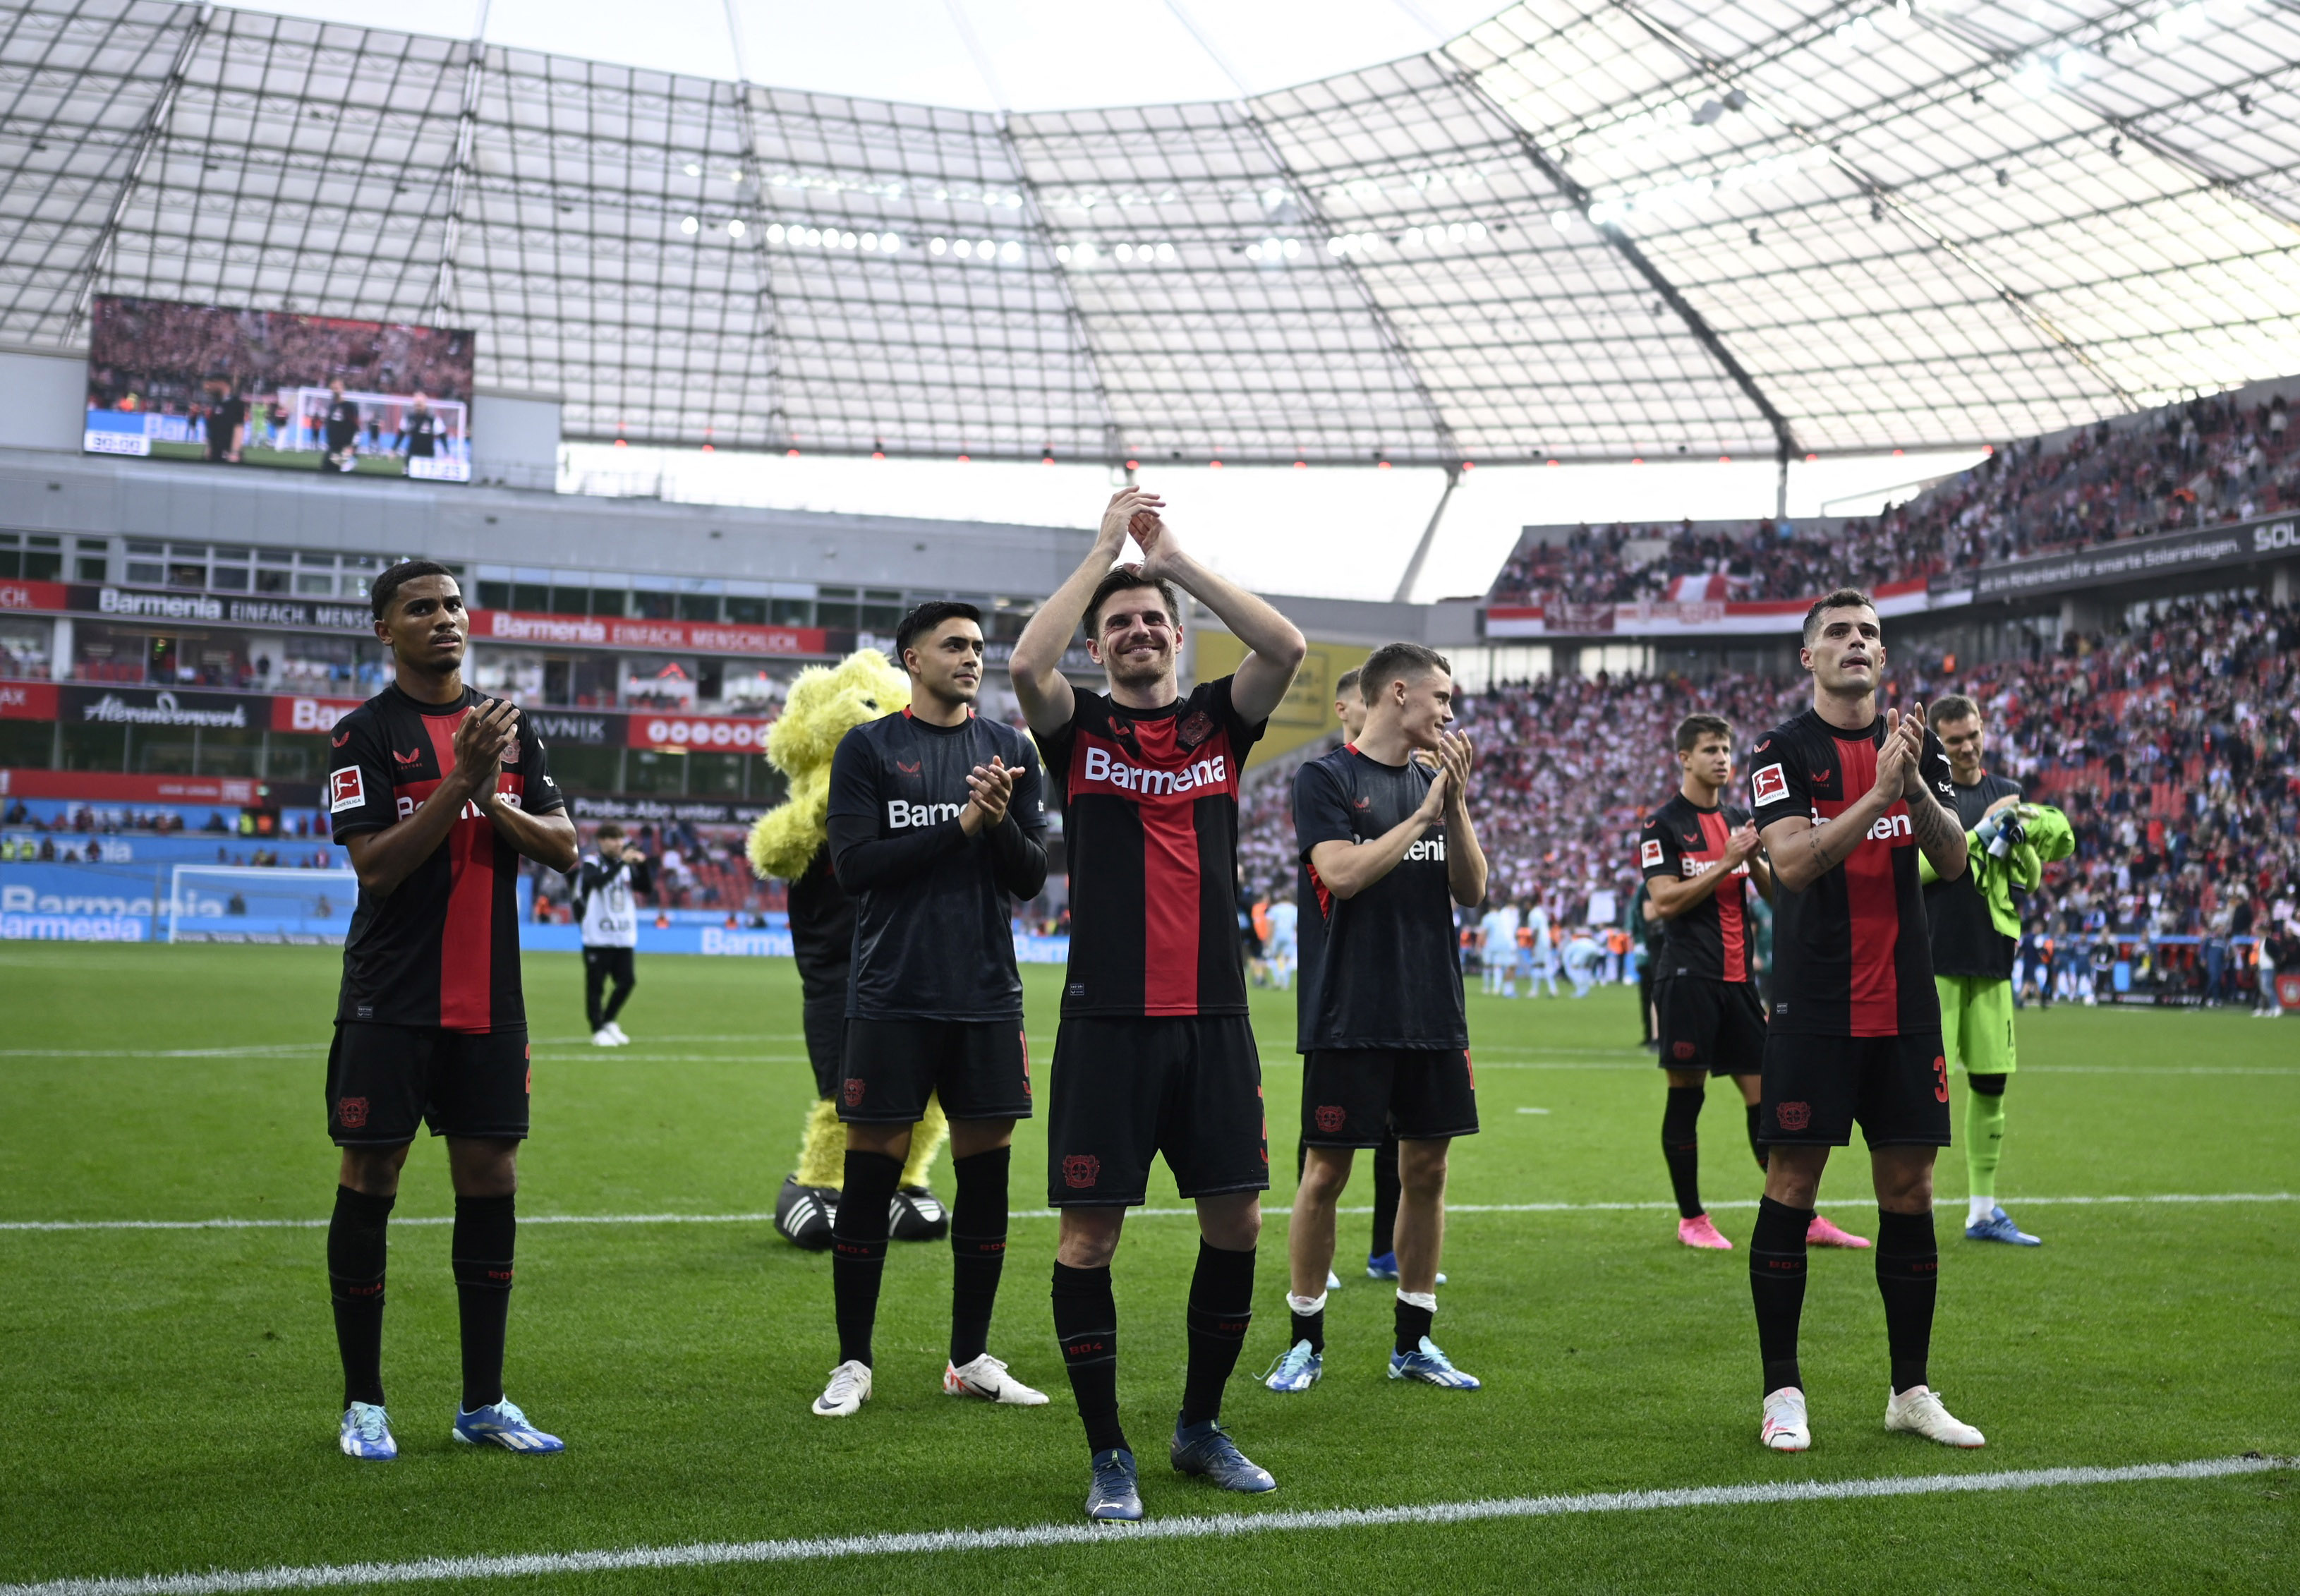 Leverkusen knocked out of Cup by third tier Elversberg, Cologne out